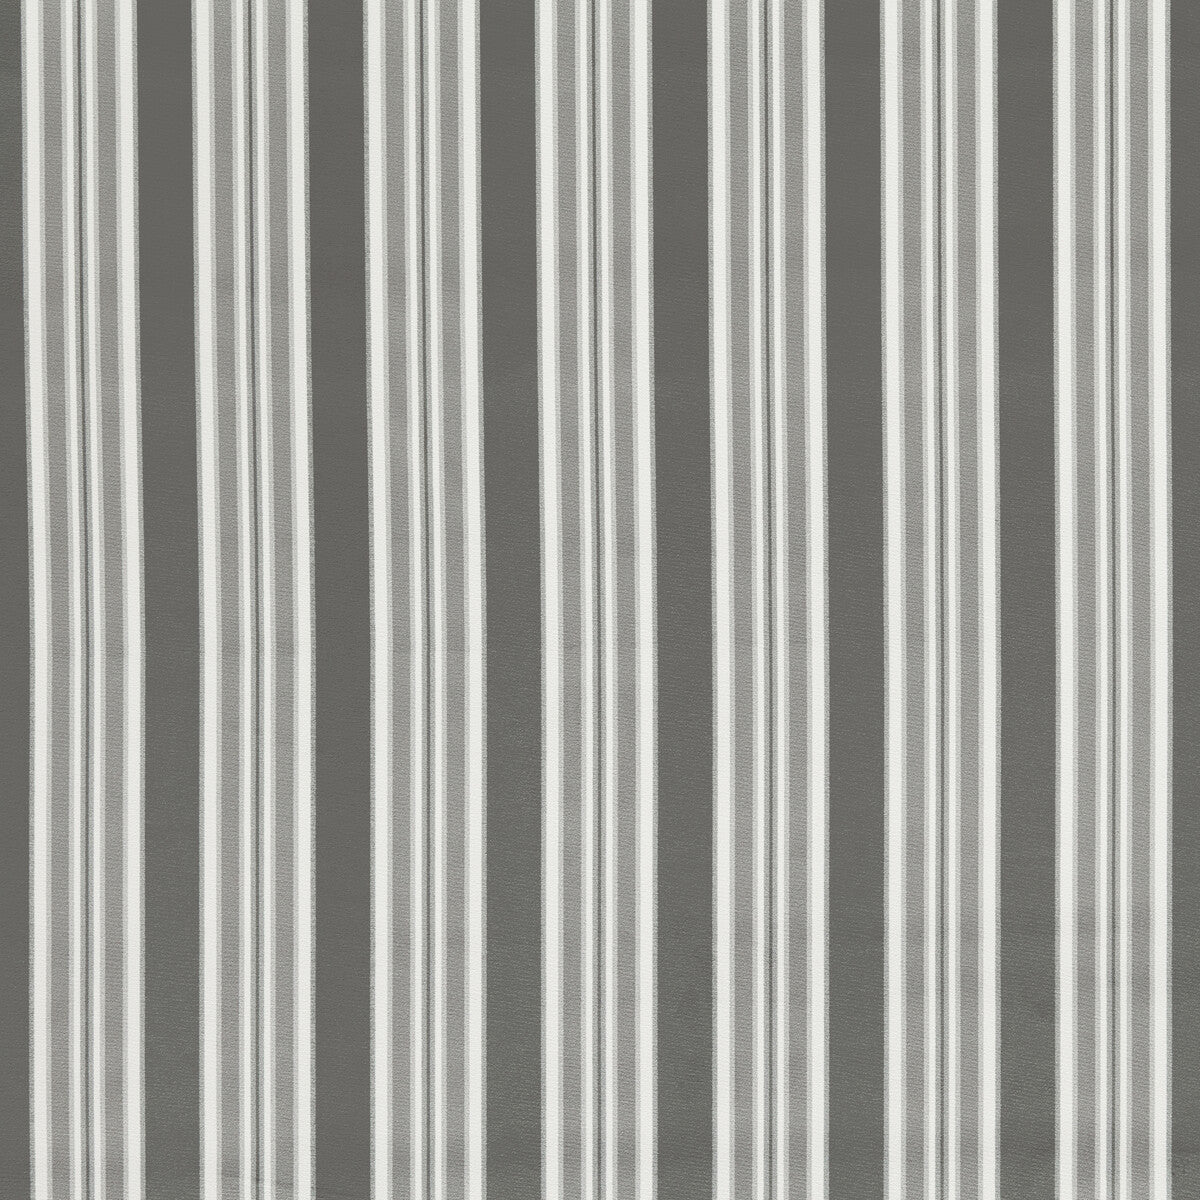 Wilmott fabric in graphite color - pattern F1691/04.CAC.0 - by Clarke And Clarke in the Whitworth collection